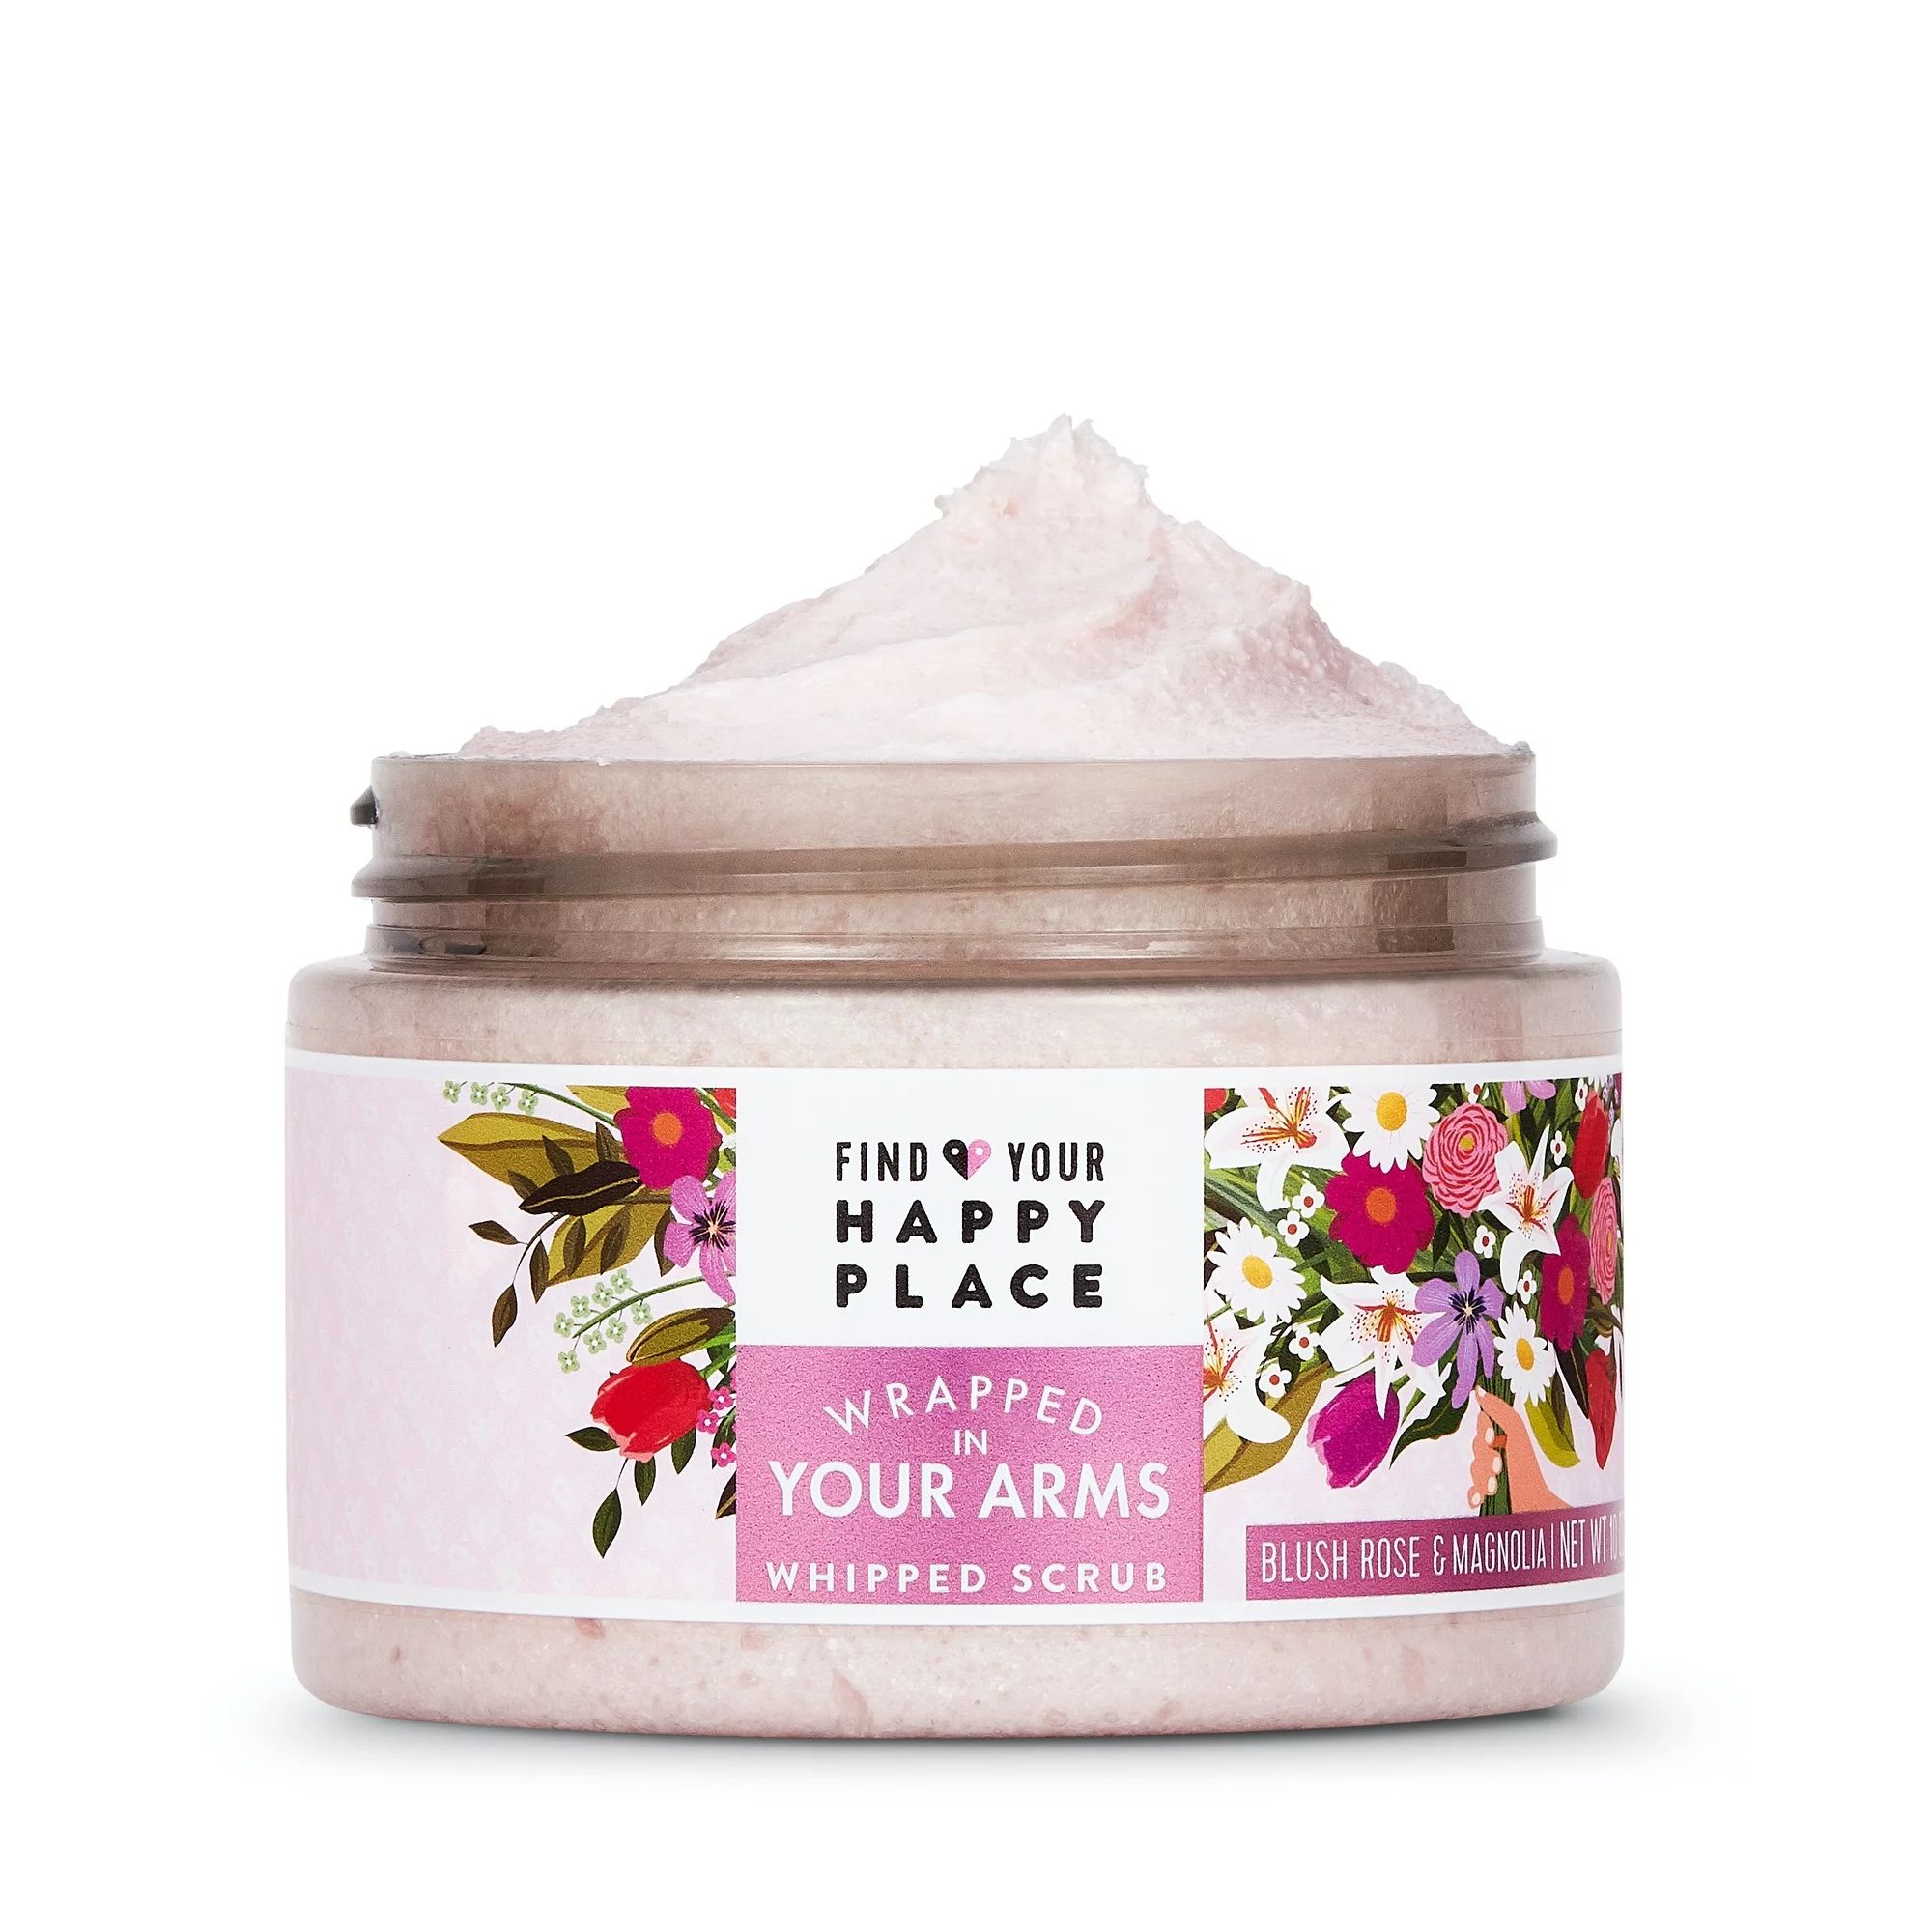 Find Your Happy Place Whipped Body Scrub Wrapped In Your Arms Blush Rose and Magnolia 10 fl oz | Walmart (US)